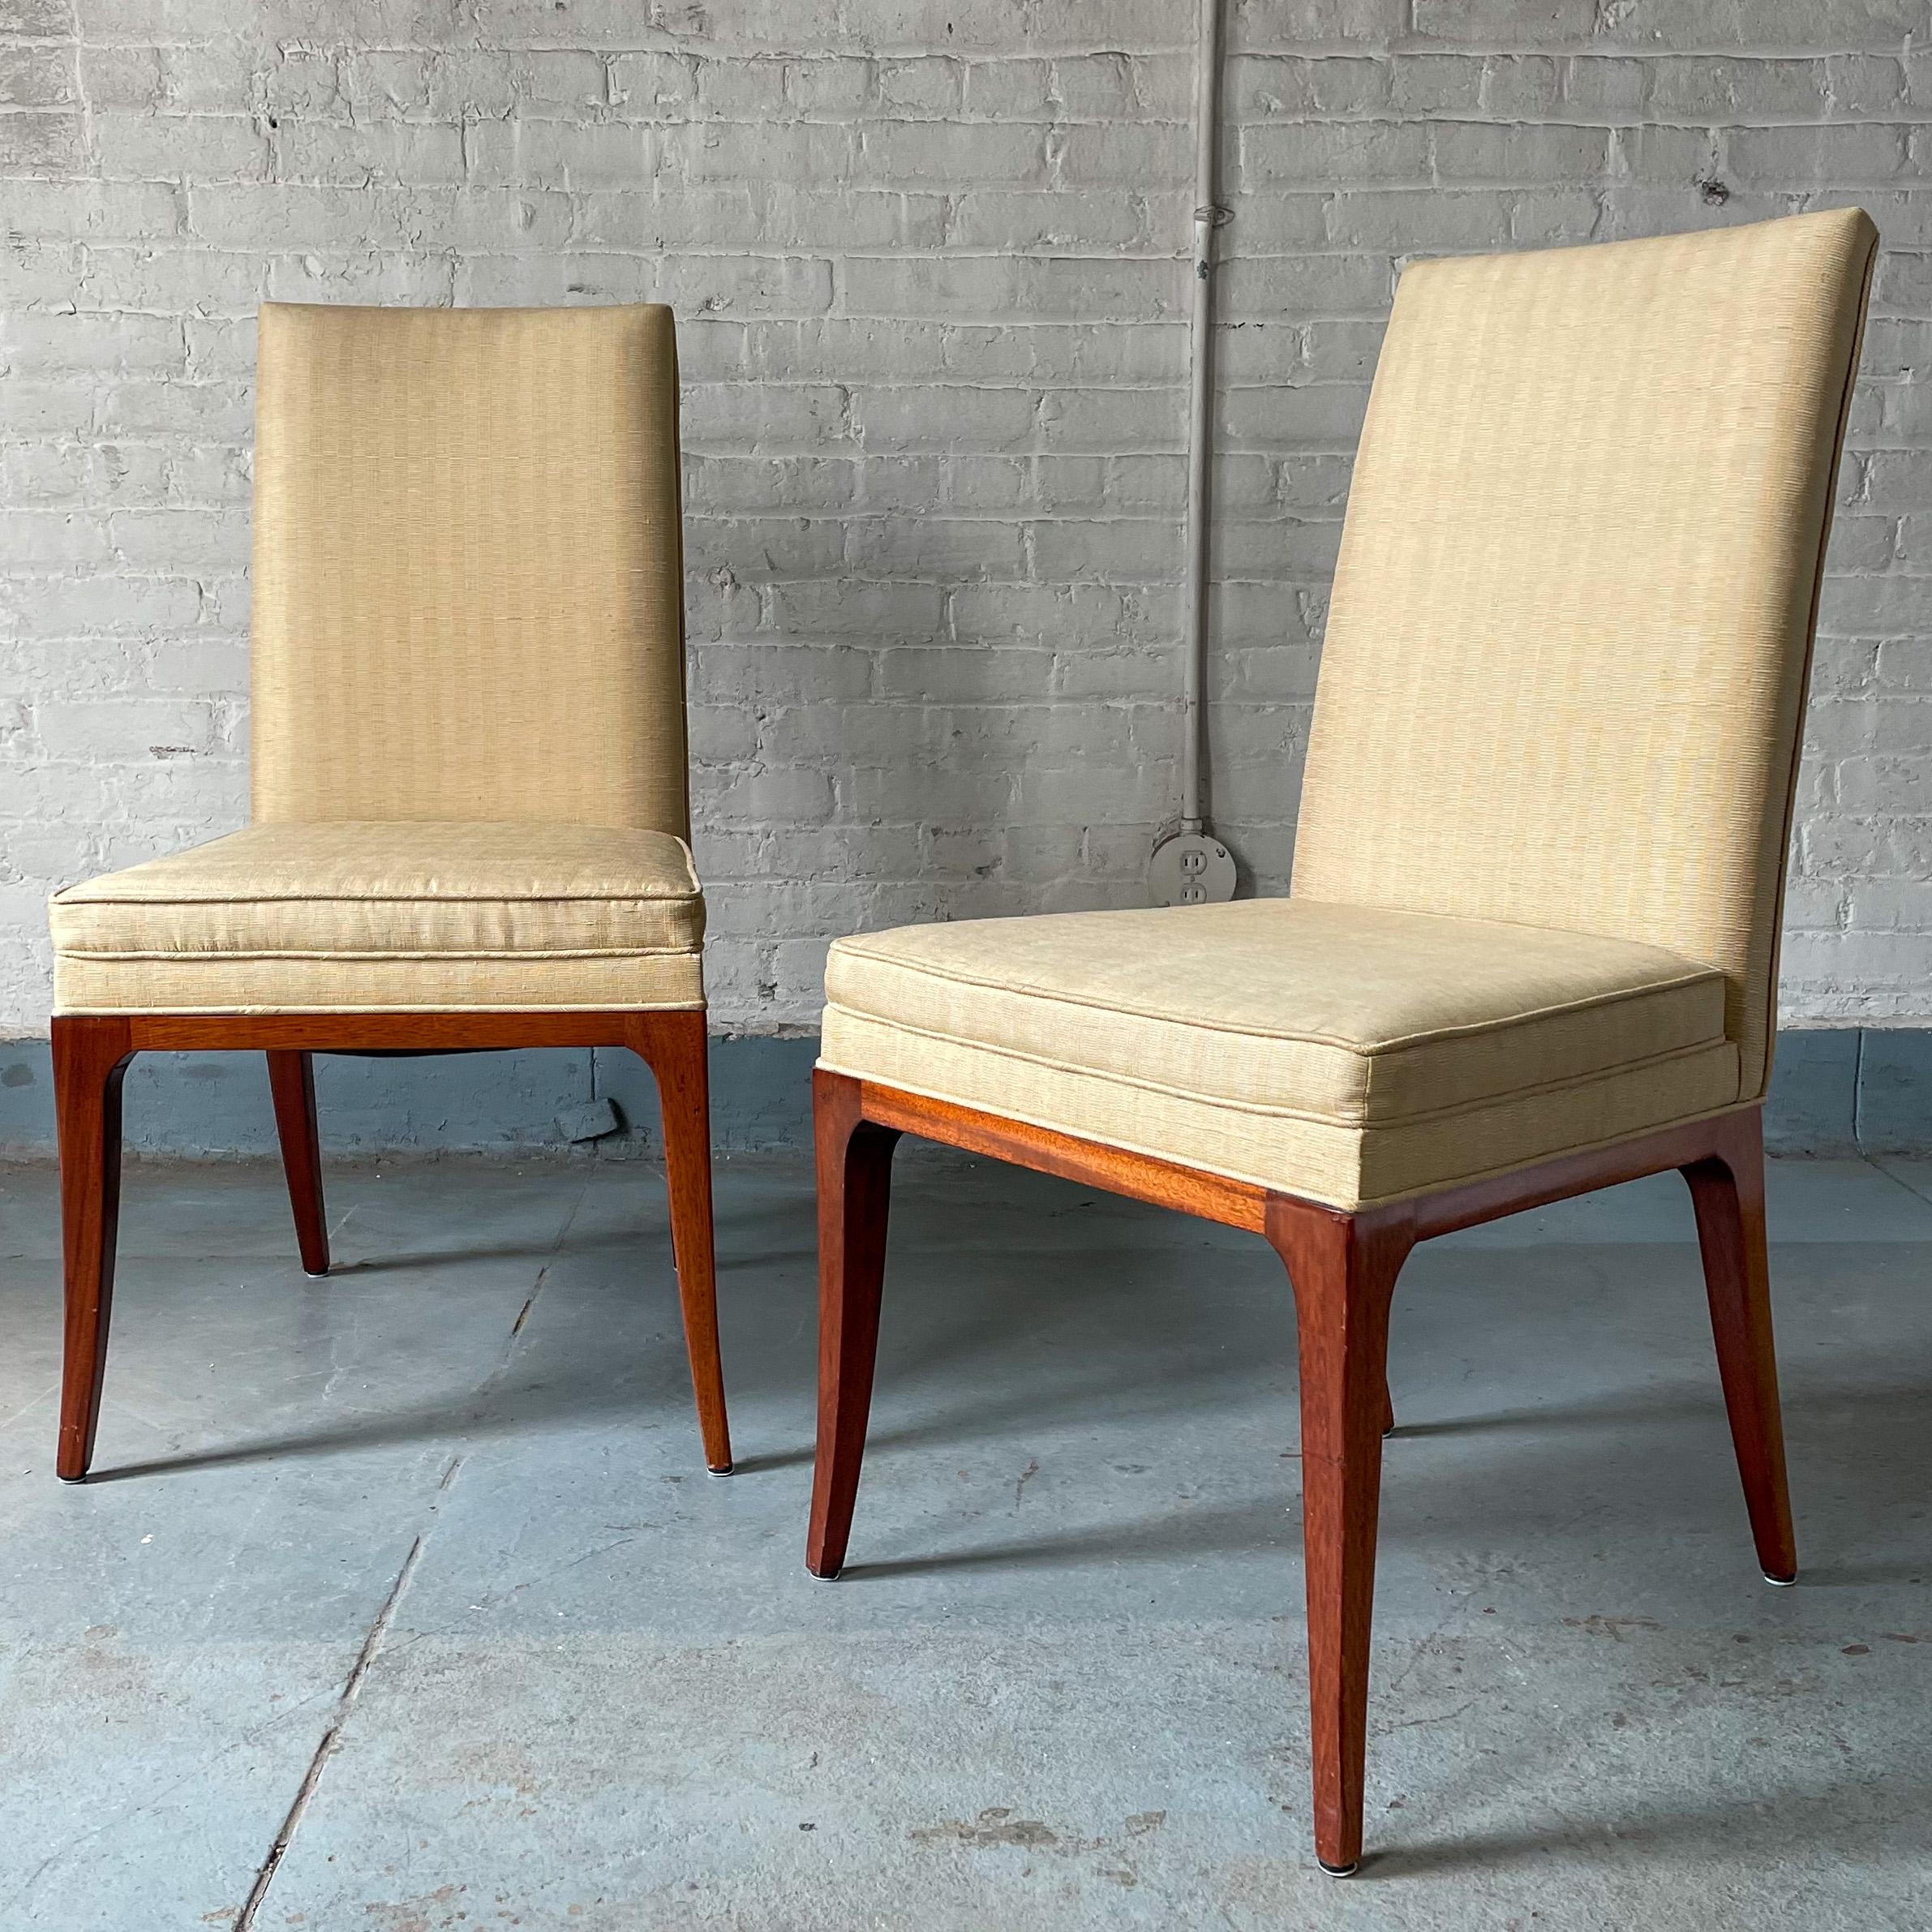 Set of eight high-back dining chairs with slender, elegantly curved mahogany legs and fully upholstered seats and backs. Attributed to Directional, possibly a Paul McCobb design, mid to late 20th century. Provenance: Alan Moss Gallery, thence to a